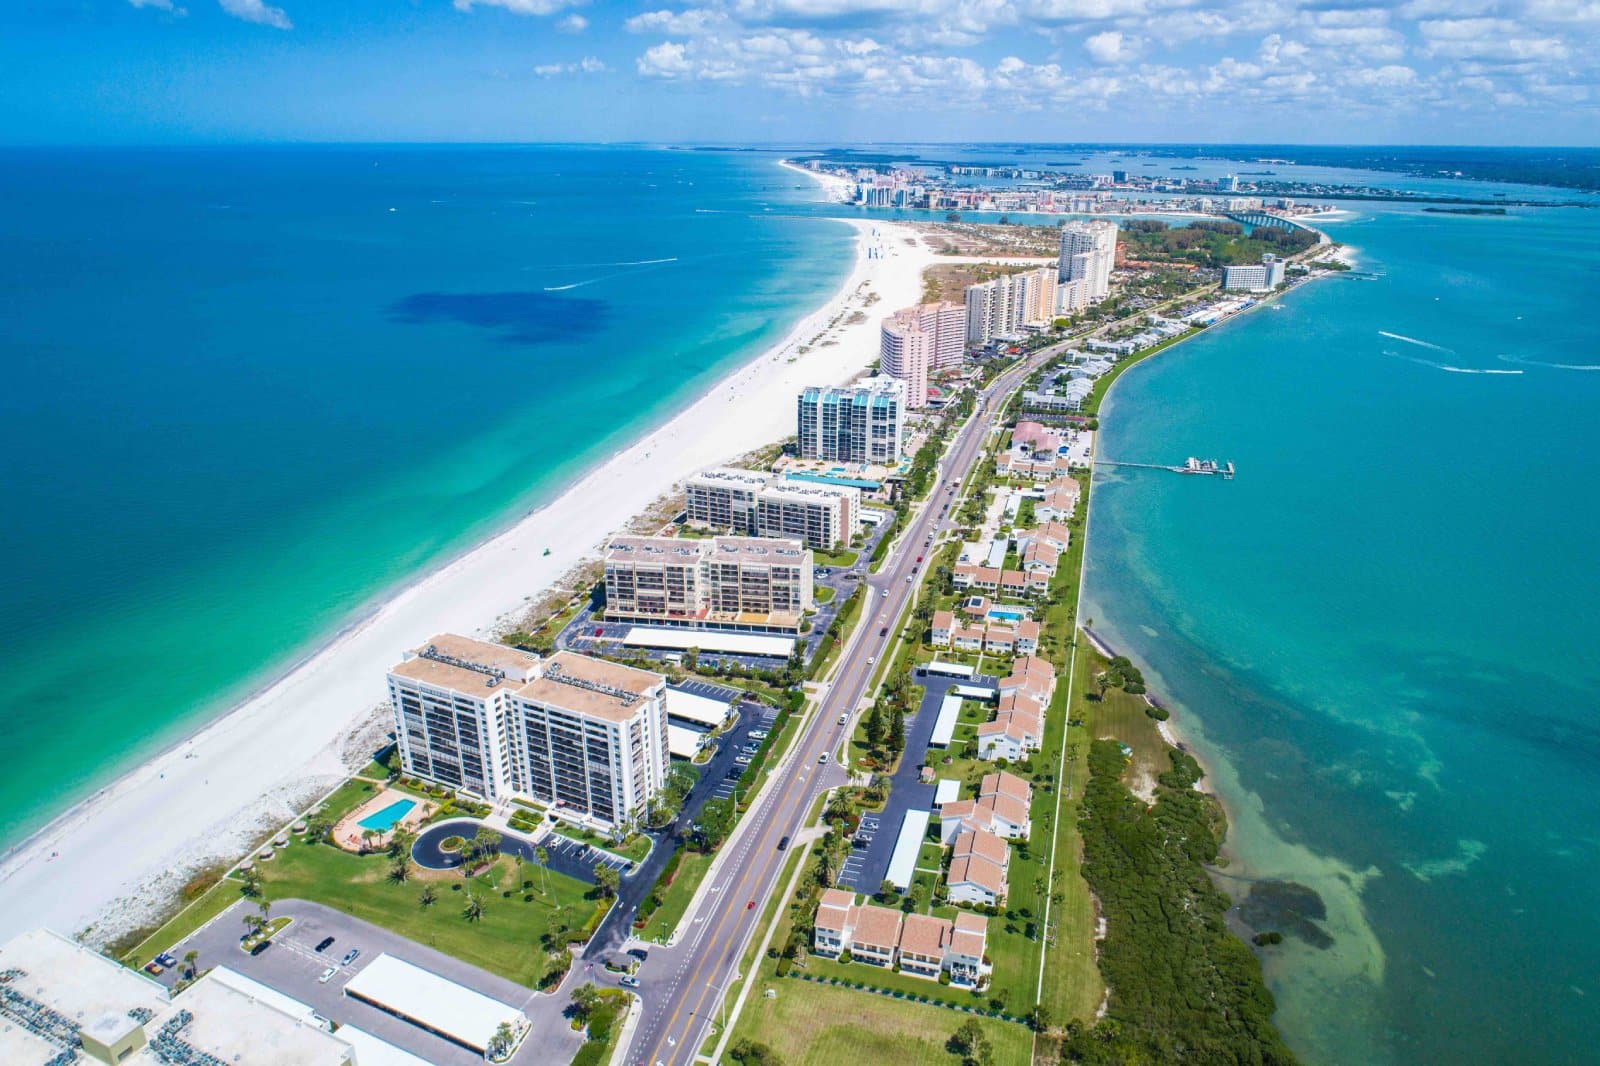 <p class="wp-caption-text">Image Credit: Shutterstock / Garrett Brown</p>  <p><span>St. Petersburg, known as the Sunshine City, boasts a vibrant arts scene, beautiful beaches, and an inviting subtropical climate. This Floridian gem on the Gulf Coast offers an array of outdoor activities, from sailing and fishing to exploring the pristine Fort De Soto Park. The city’s downtown area is a hub of culture and entertainment, home to the renowned Salvador Dali Museum and various galleries, boutiques, and eateries. St. Petersburg’s commitment to the arts is visible in its colorful murals and thriving music scene. The city also serves as a gateway to the Gulf of Mexico’s stunning beaches, known for their crystal-clear waters and soft, white sand.</span></p>